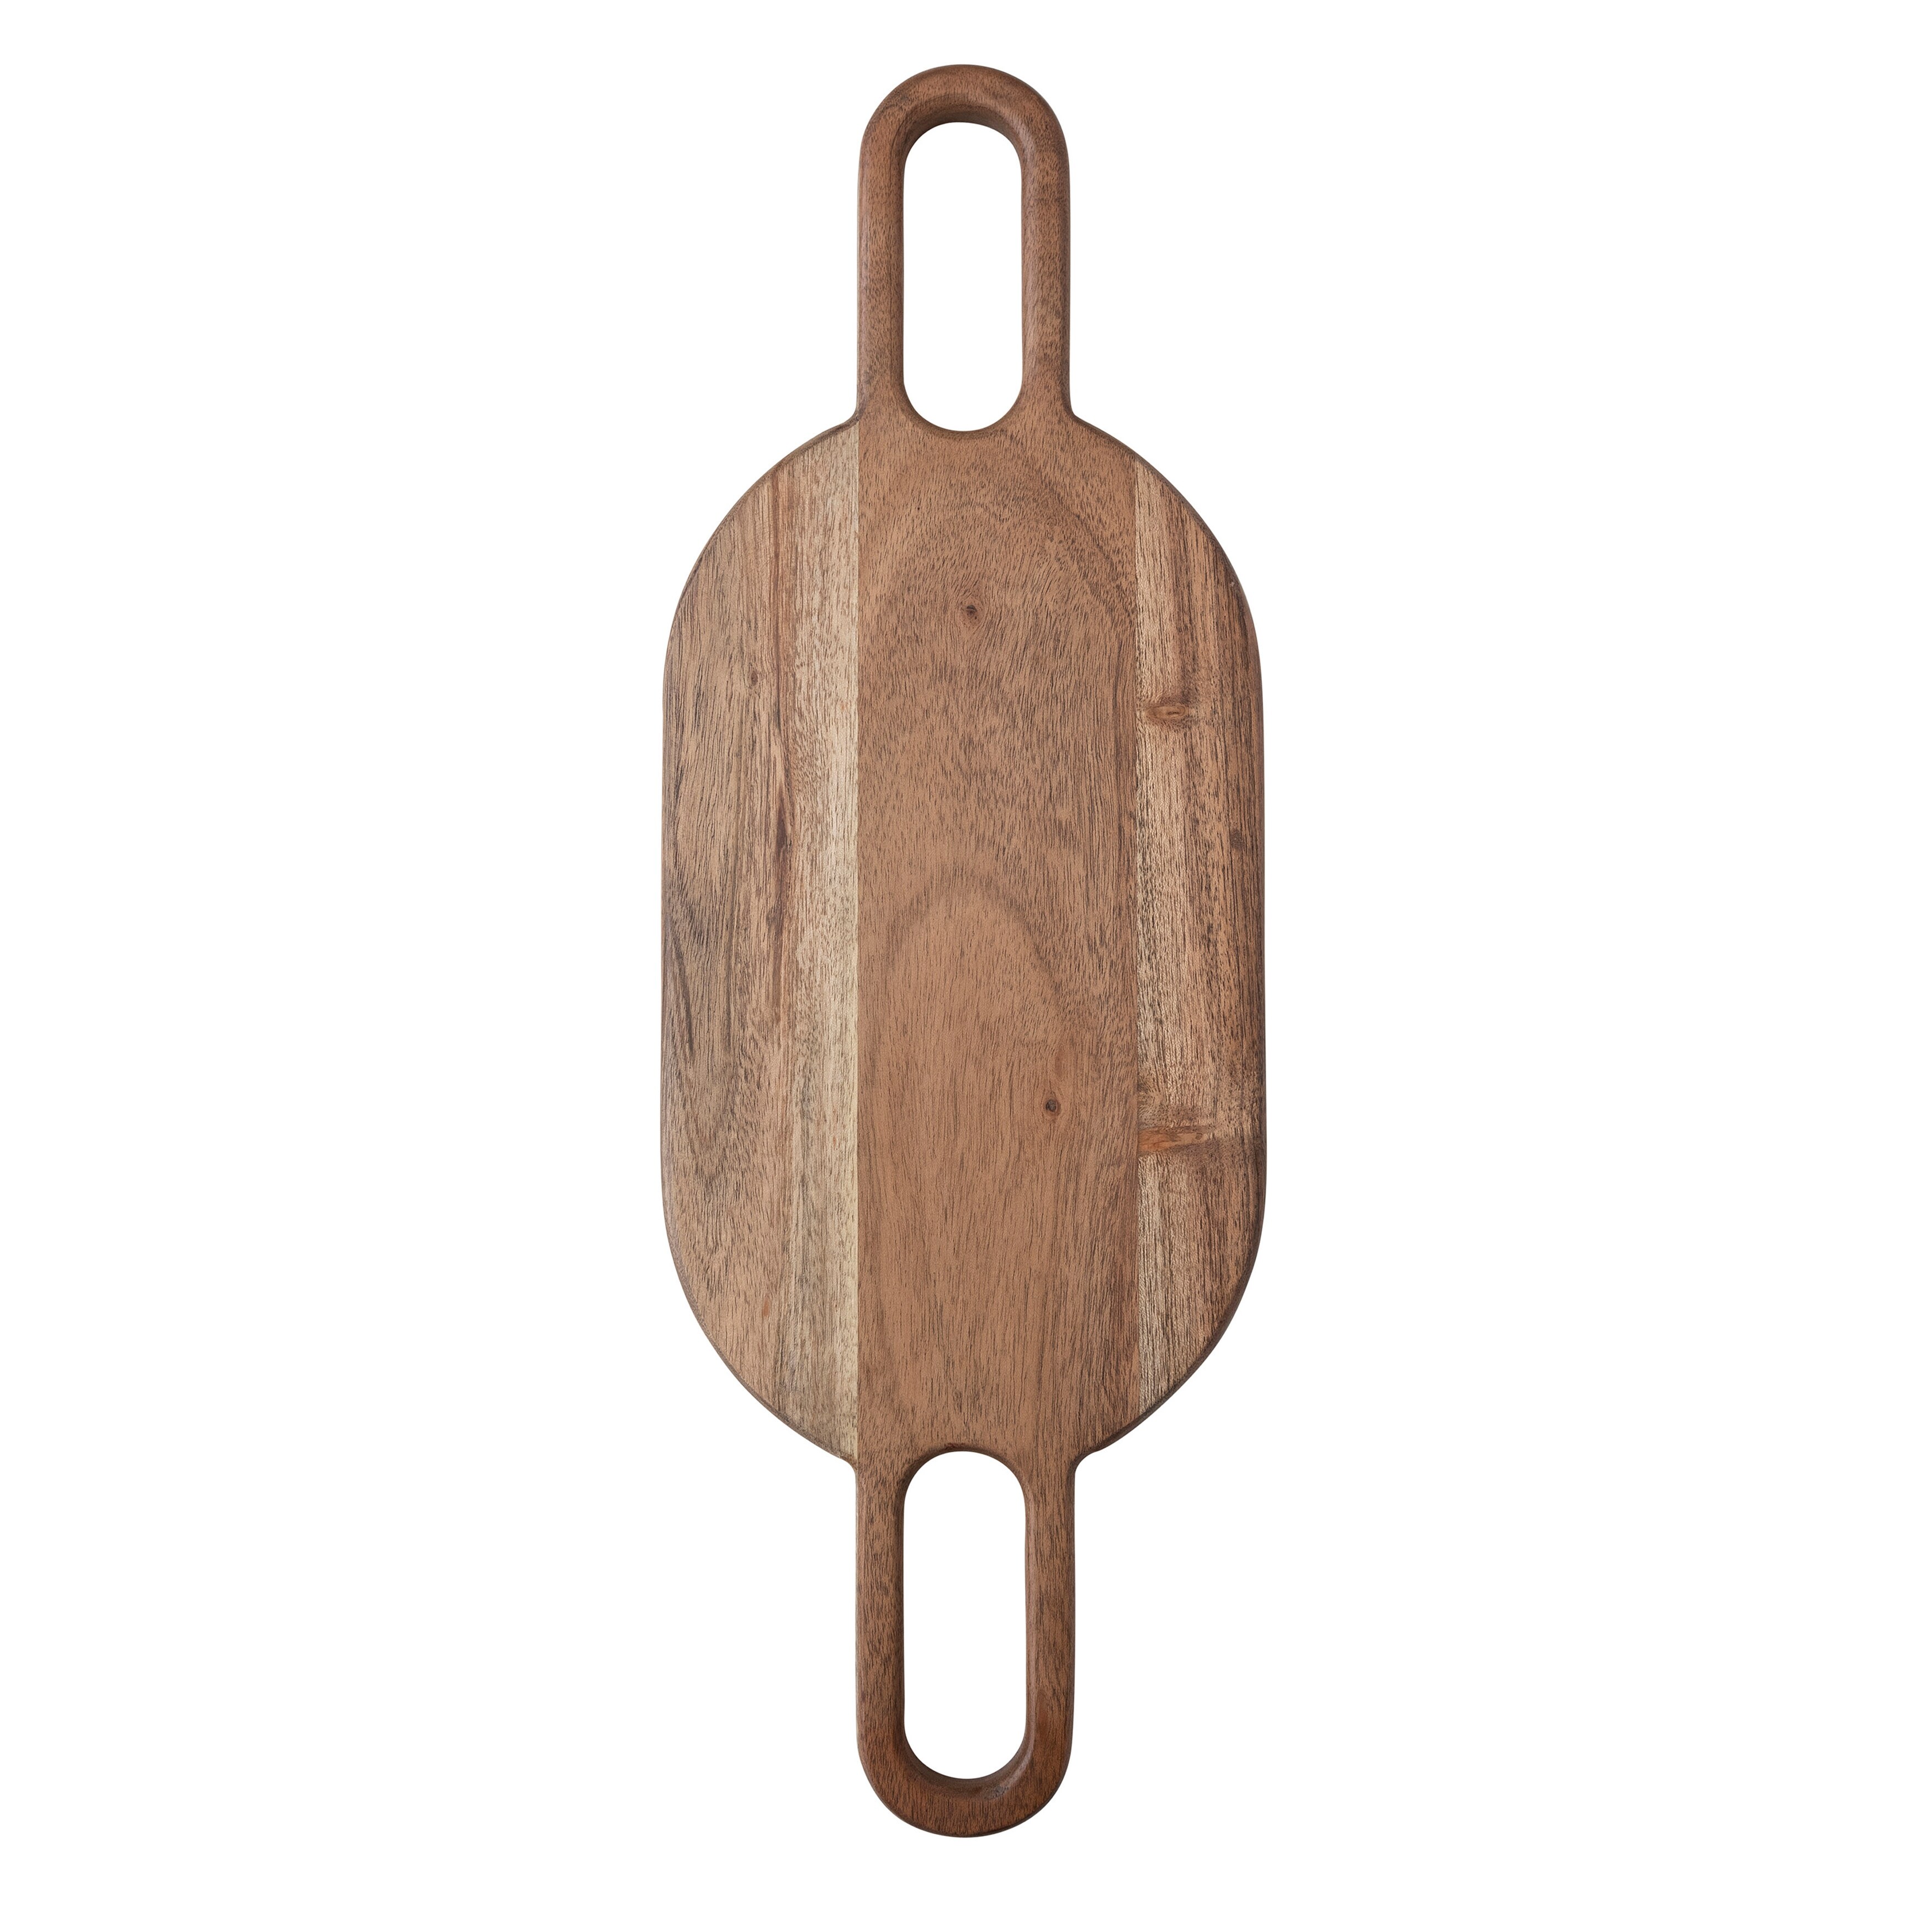  Acacia Wood Cutting Board with Handle Wooden Chopping